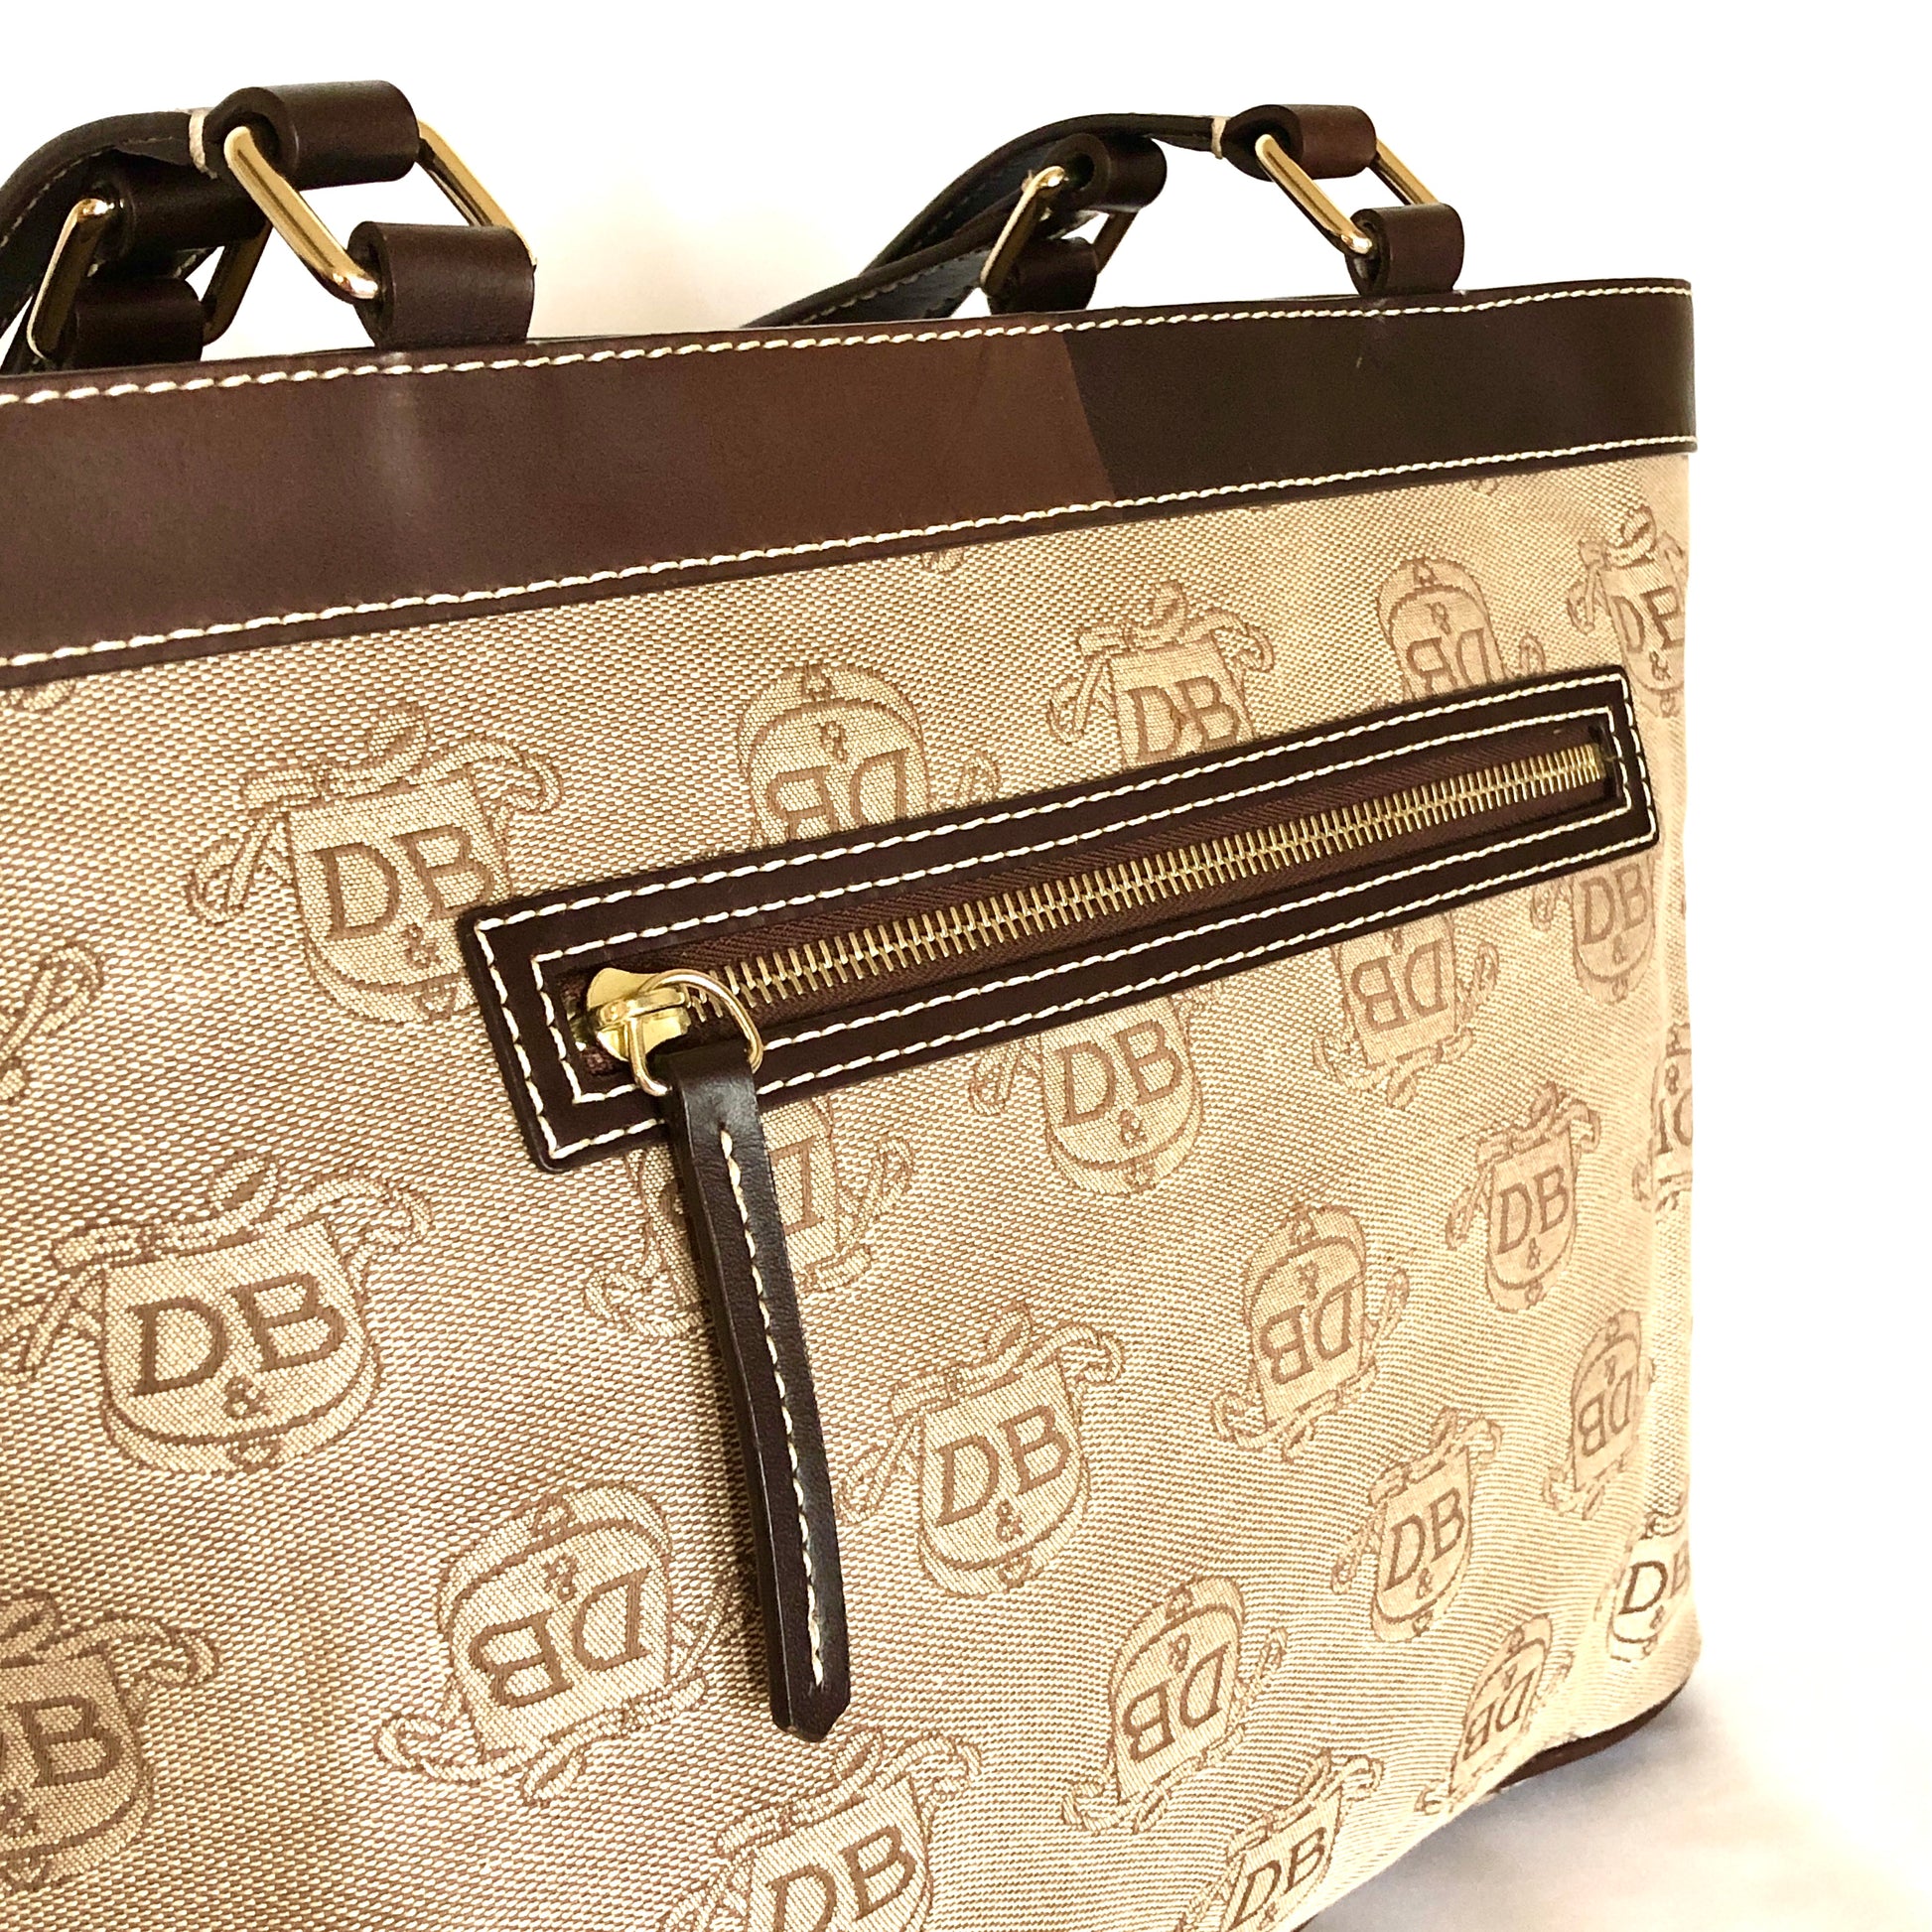 How to Spot Fake Dooney & Bourke Bags: 5 Ways to Tell Real Purses